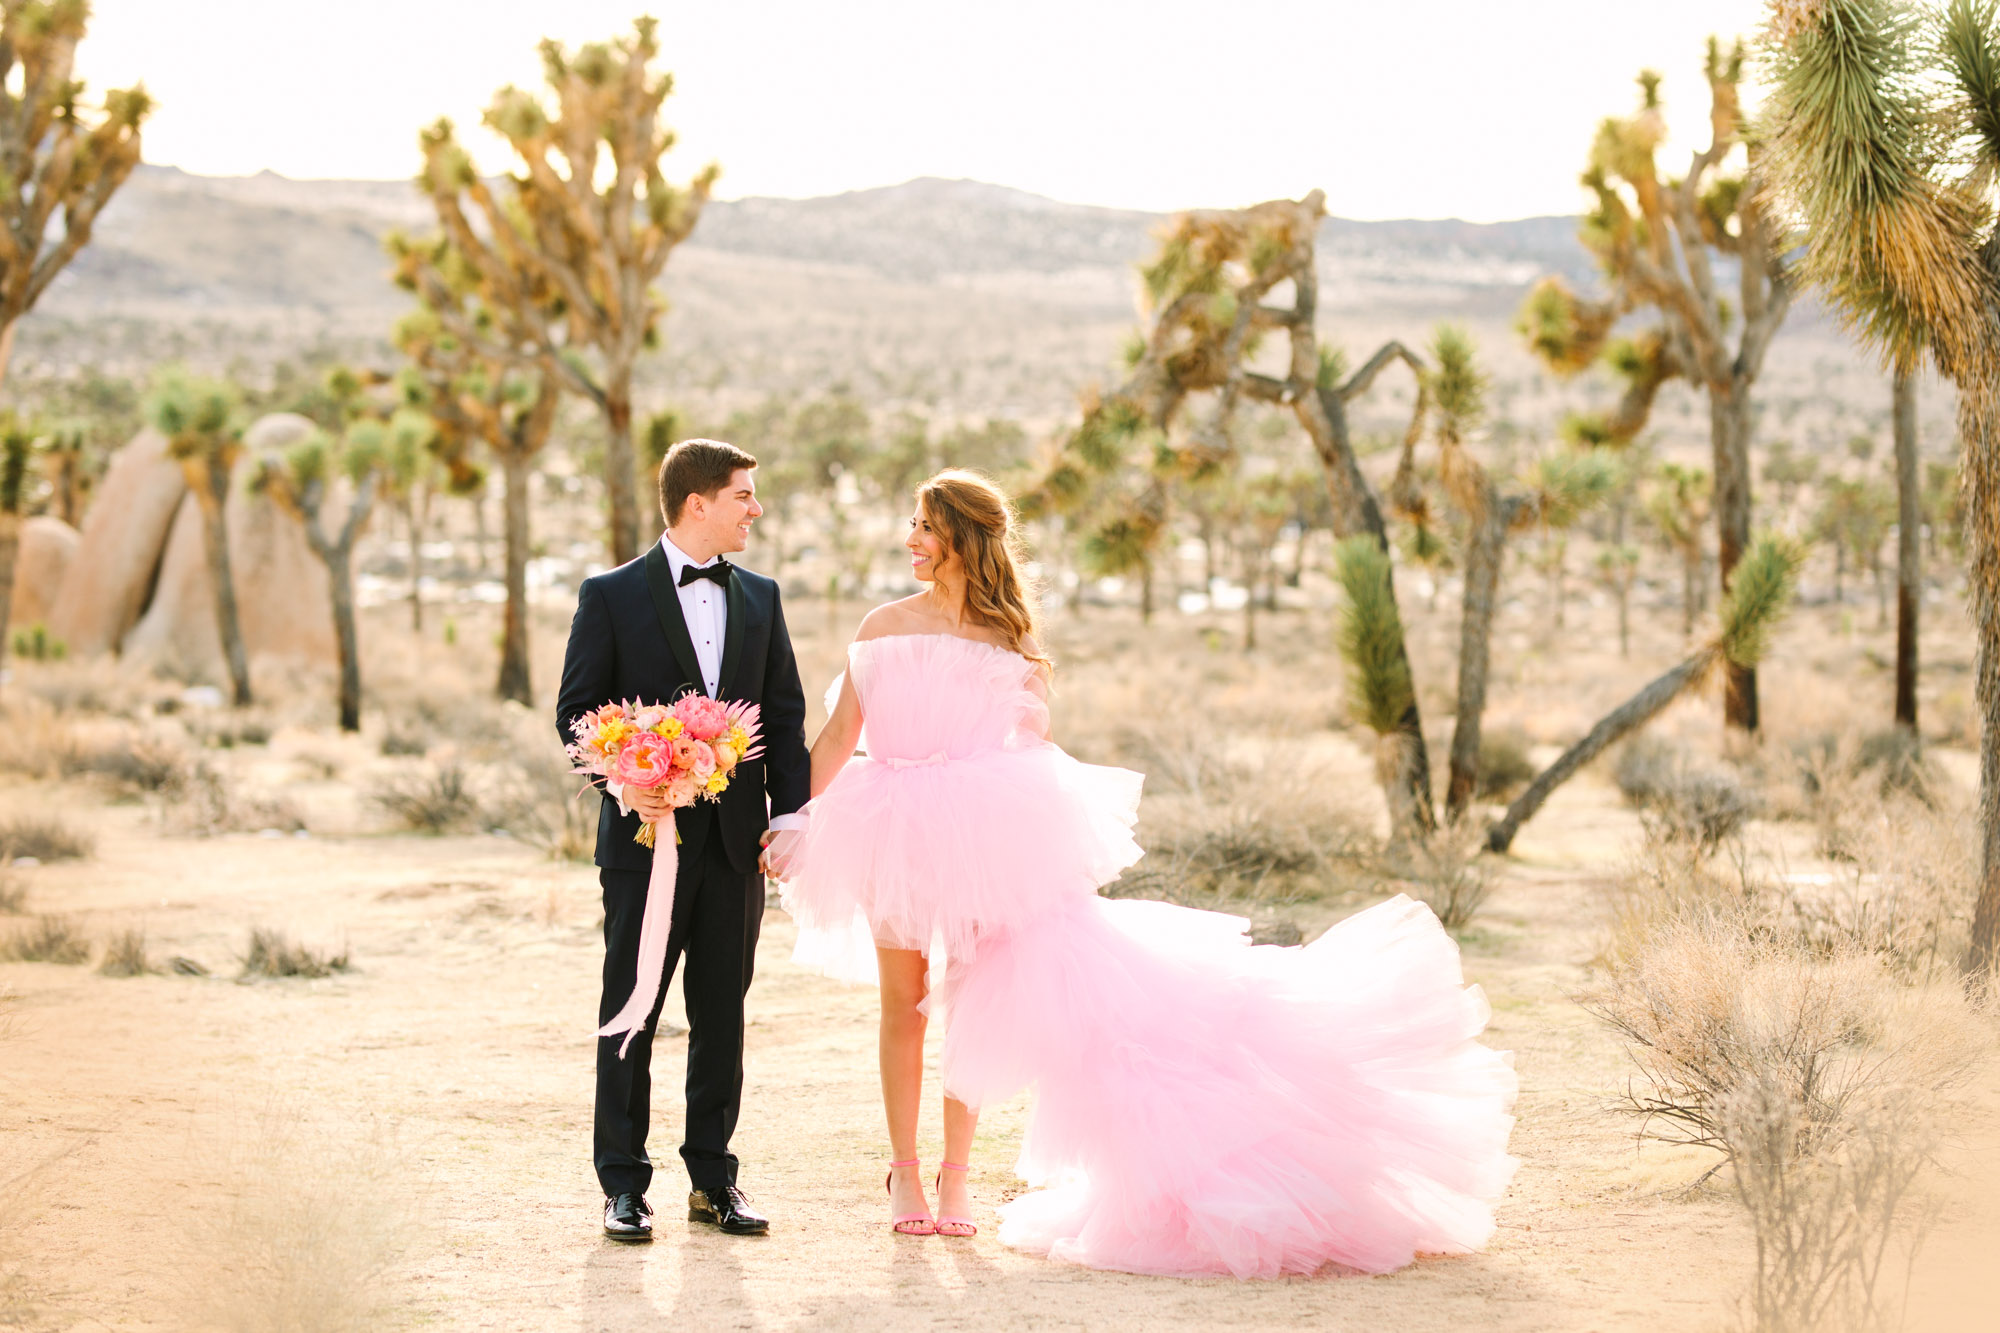 Pink wedding dress Joshua Tree elopement featured on Green Wedding Shoes | Colorful desert wedding inspiration for fun-loving couples in Southern California #joshuatreewedding #joshuatreeelopement #pinkwedding #greenweddingshoes Source: Mary Costa Photography | Los Angeles